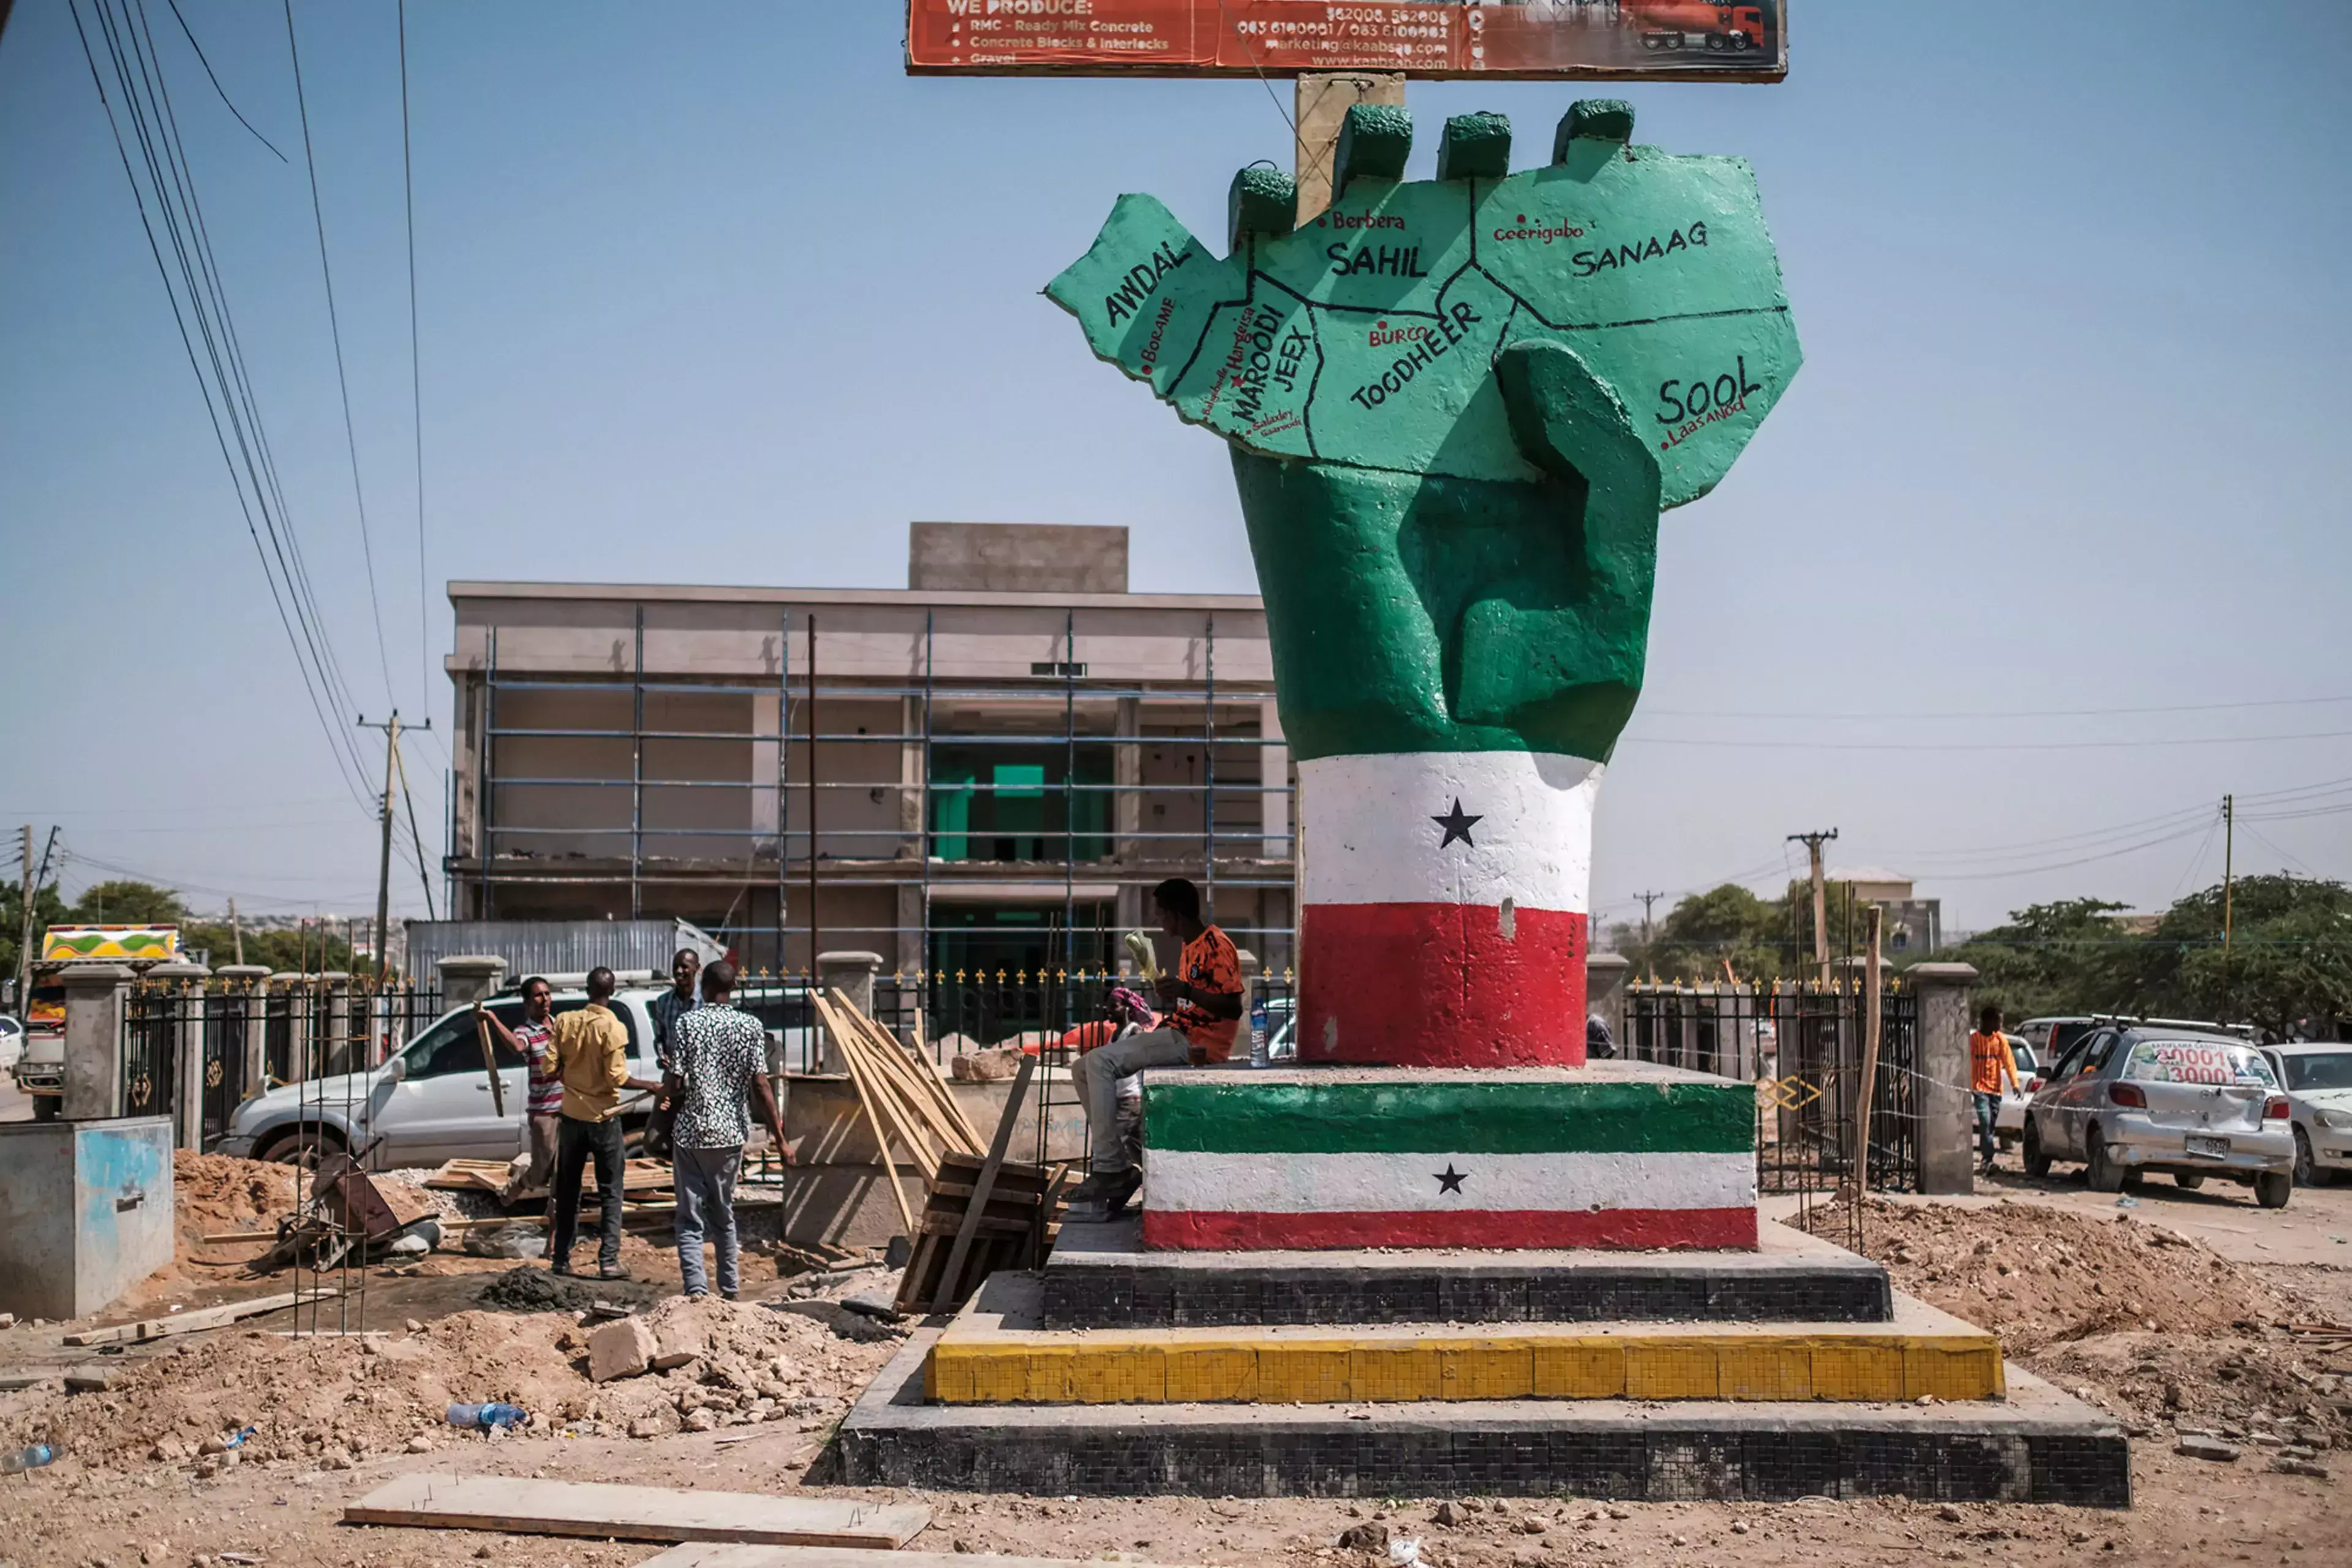 Somaliland’s Independence Monument in Hargeisa depicts a hand holding a map of the area.